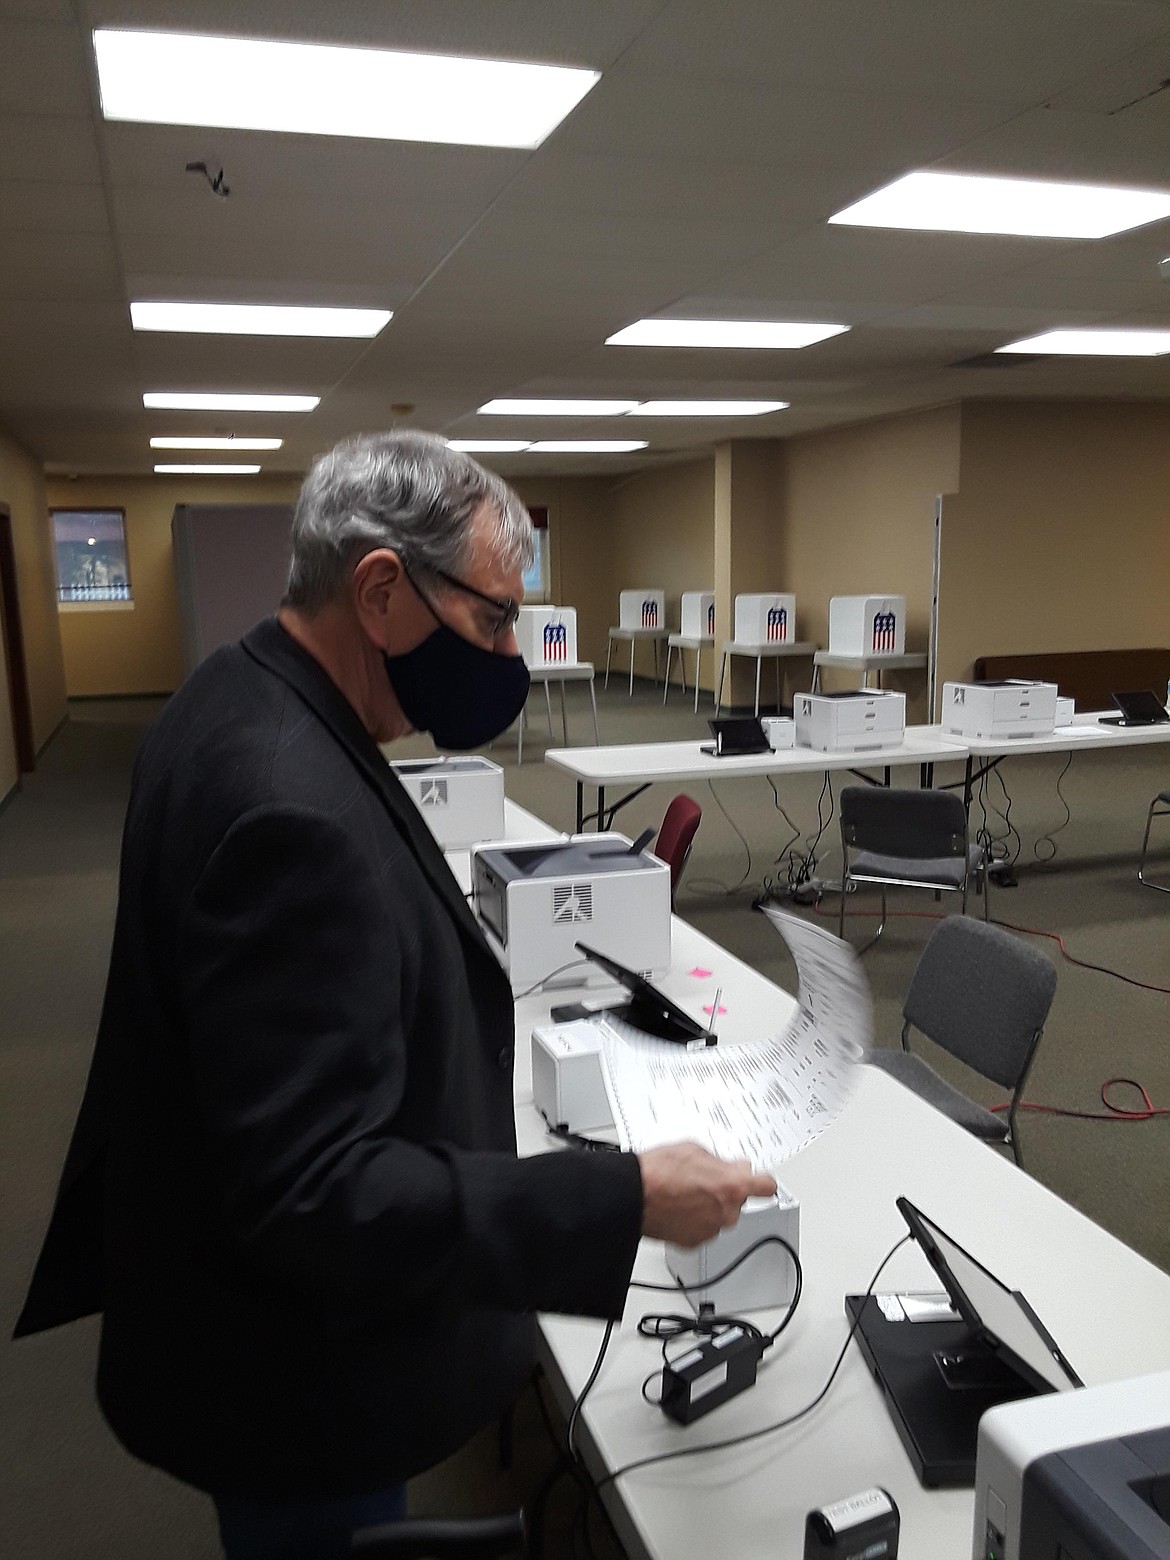 Kootenai County Clerk Jim Brannon awaits his ballot in a Friday test run leading up to Monday's early voting at the county's Elections Office on Third Street in Coeur d'Alene. Eight stations will be running simultaneously at the office for those who would like to vote early. (CRAIG NORTHRUP/Press)